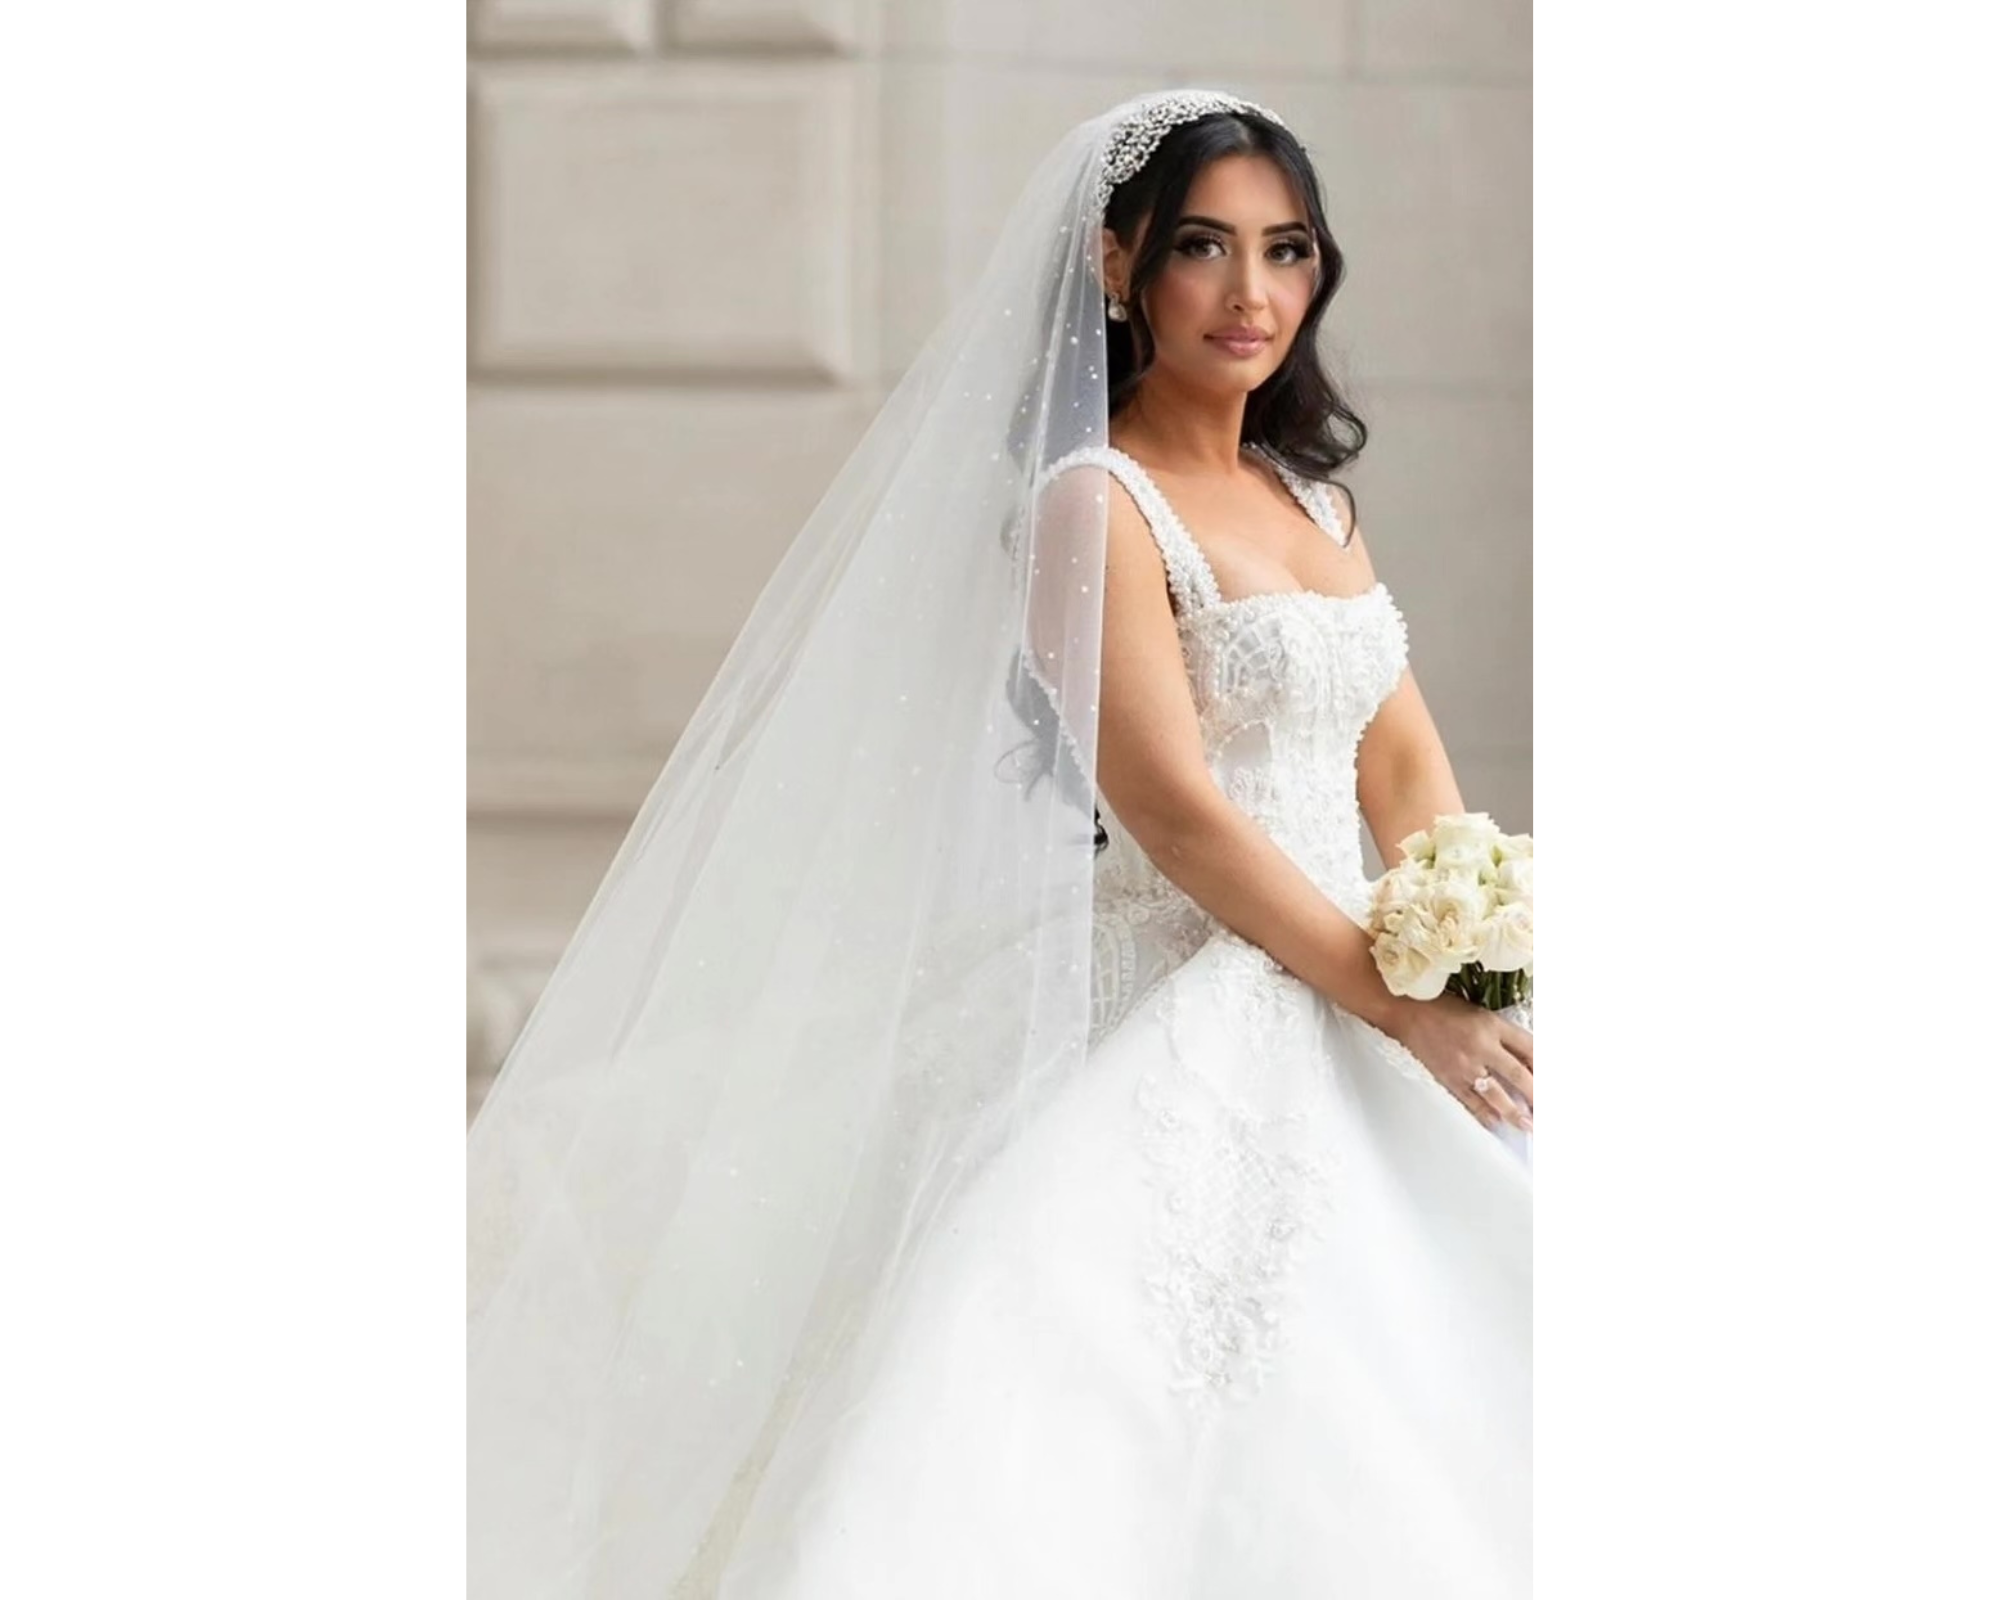 A beautiful bride in her gown with her hair down wearing her pearl and crystal hair vine headband and cathedral veil accented with pearls and crystals.